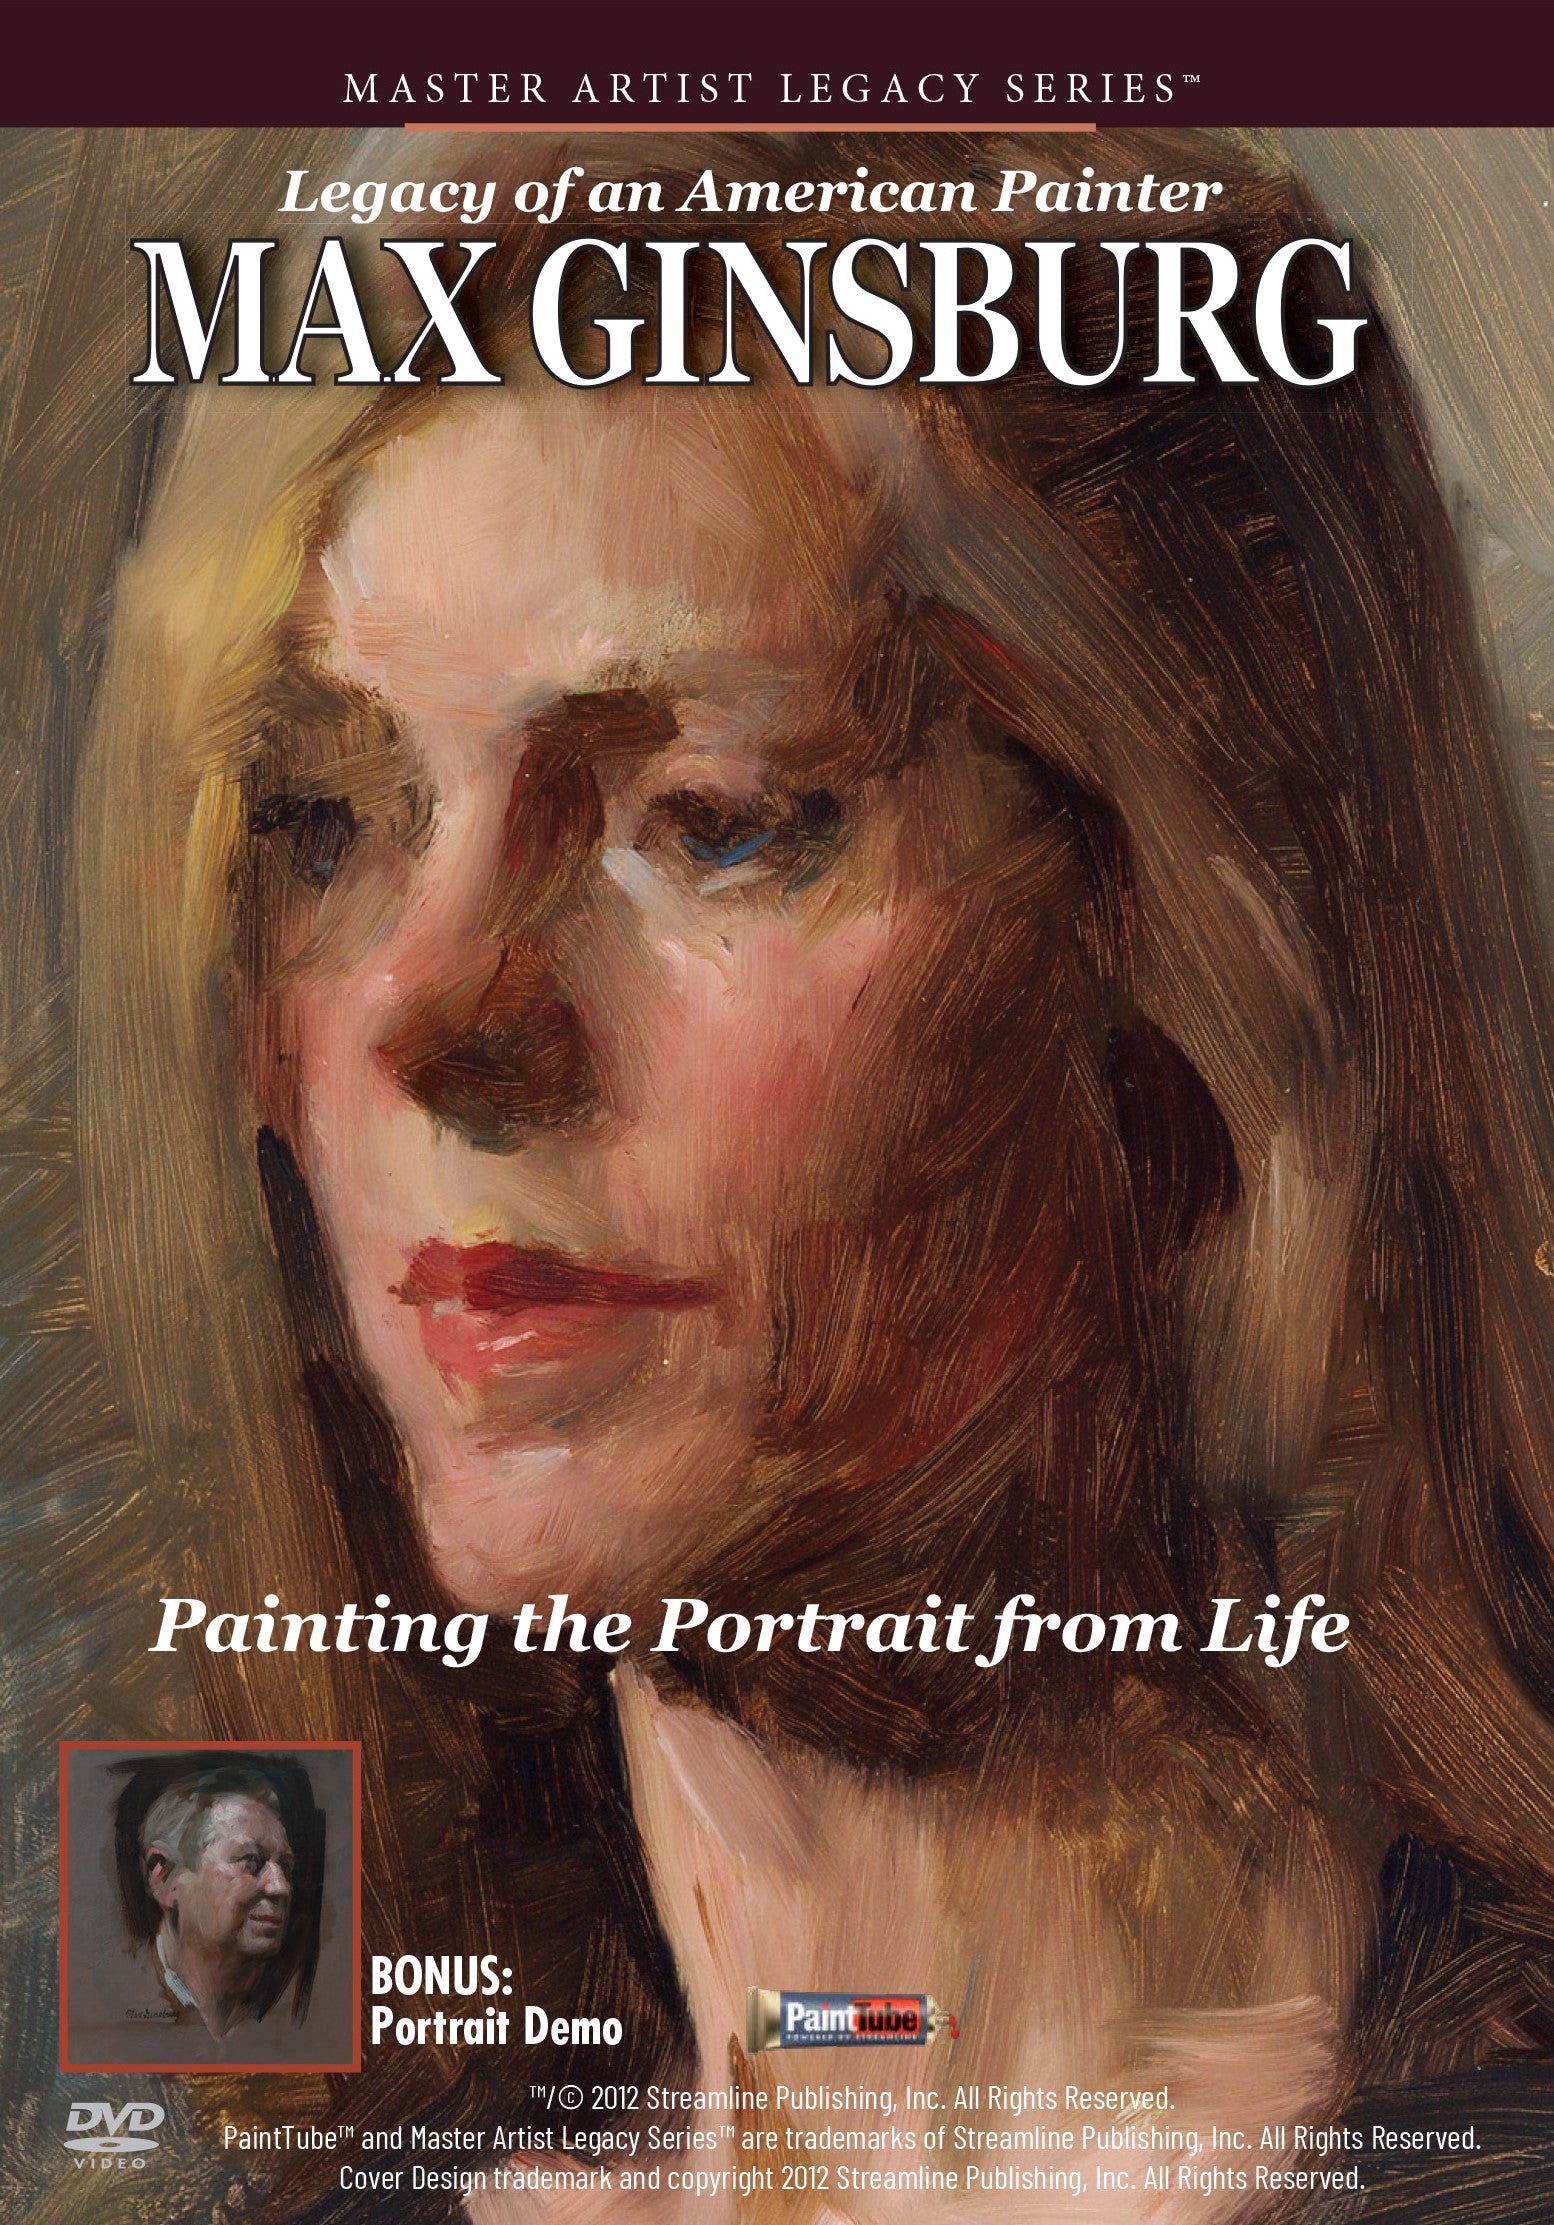 Max Ginsburg: The Legacy of an American Painter